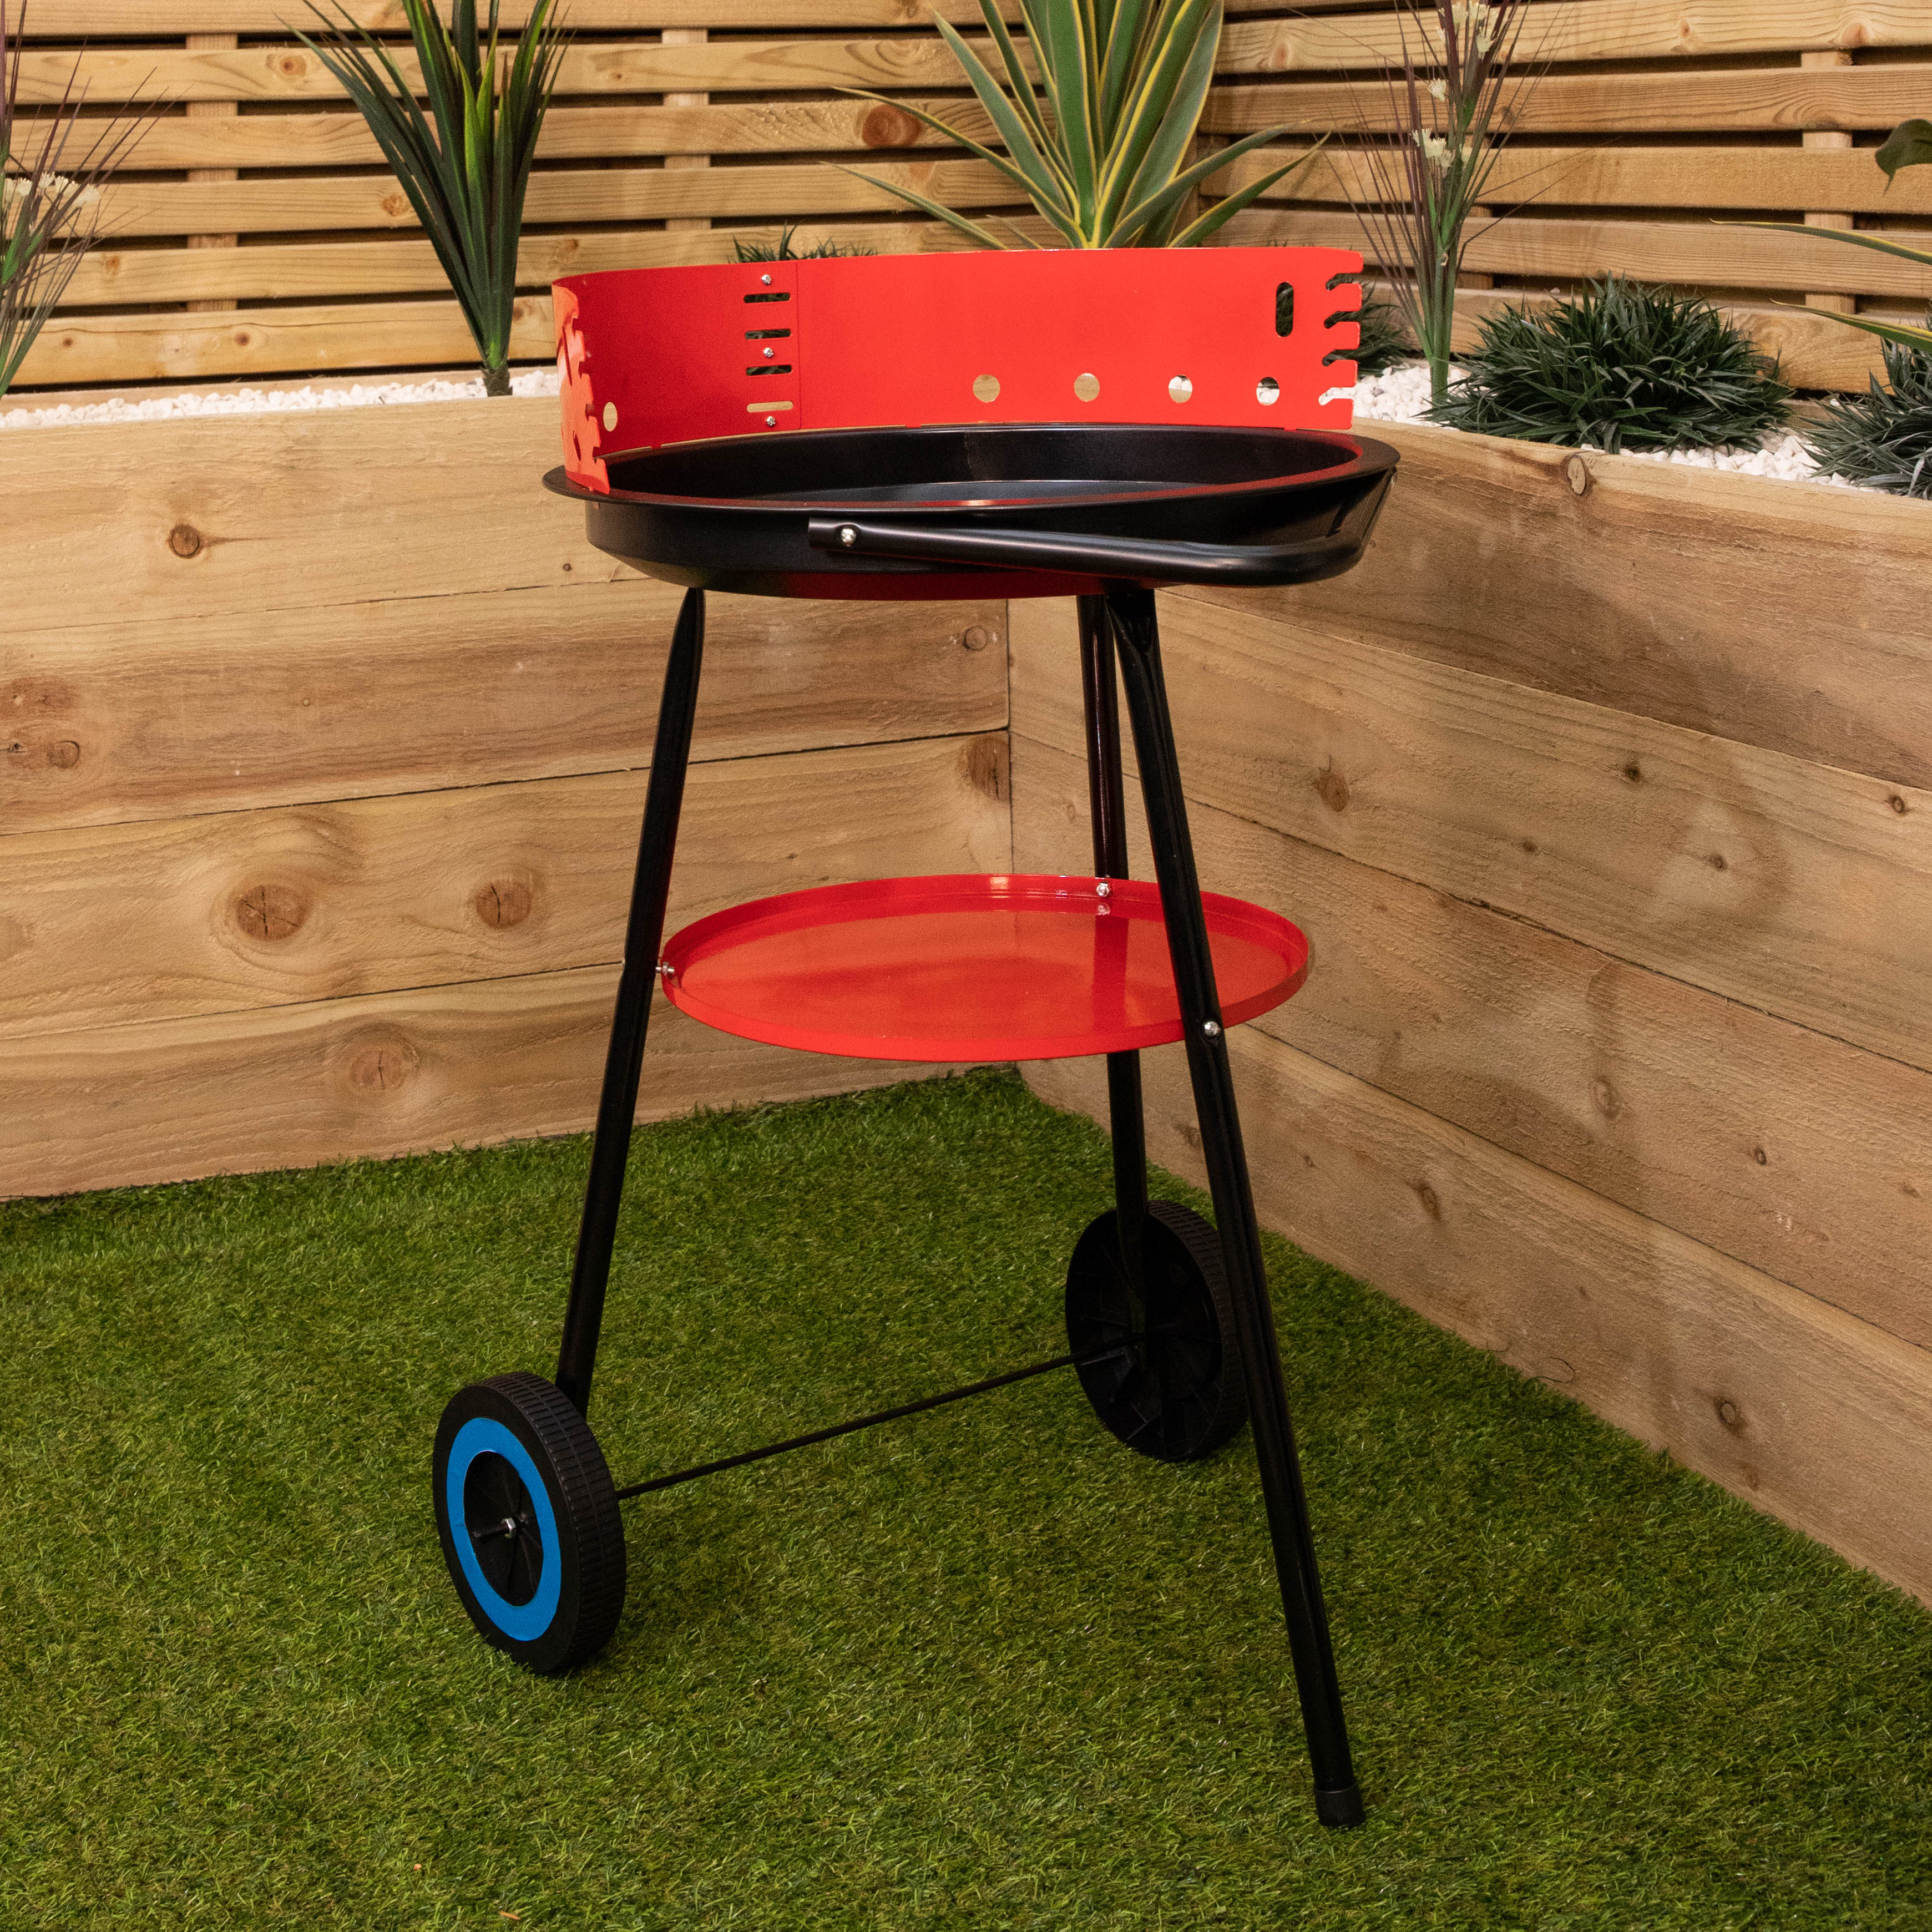 17" Outdoor Portable Garden Patio Round Charcoal Barbecue / BBQ with Wheels